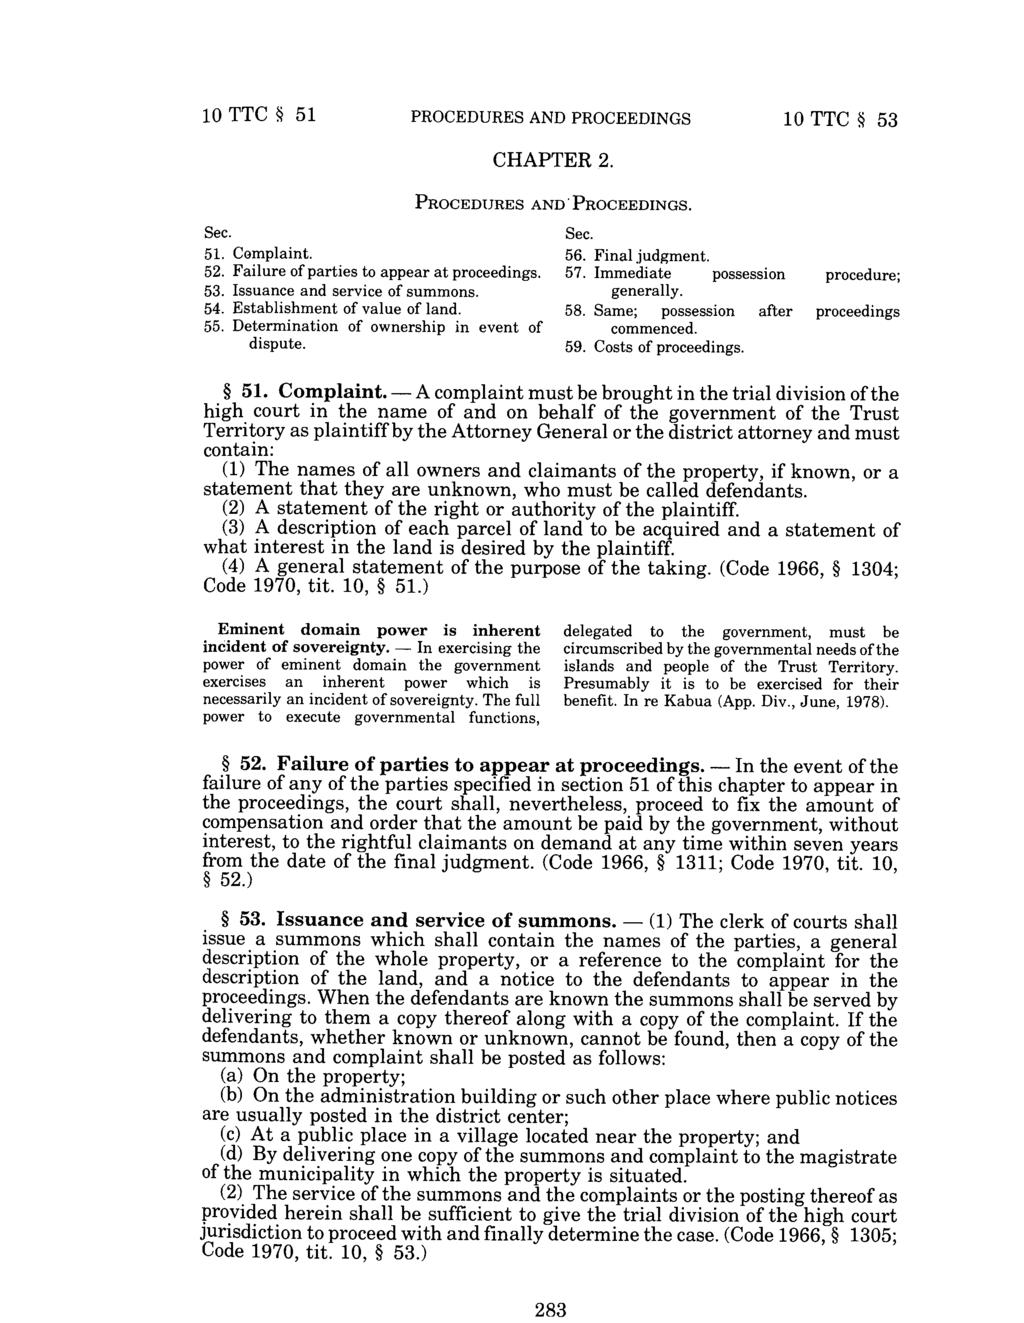 283 10 TTC * 51 PROCEDURES AND PROCEEDINGS 10 TTC * 53 CHAPTER 2. PROCEDURES AND' PROCEEDINGS. 51. Complaint. 52. Failure of parties to appear at proceedings. 53. Issuance and service of summons. 54.